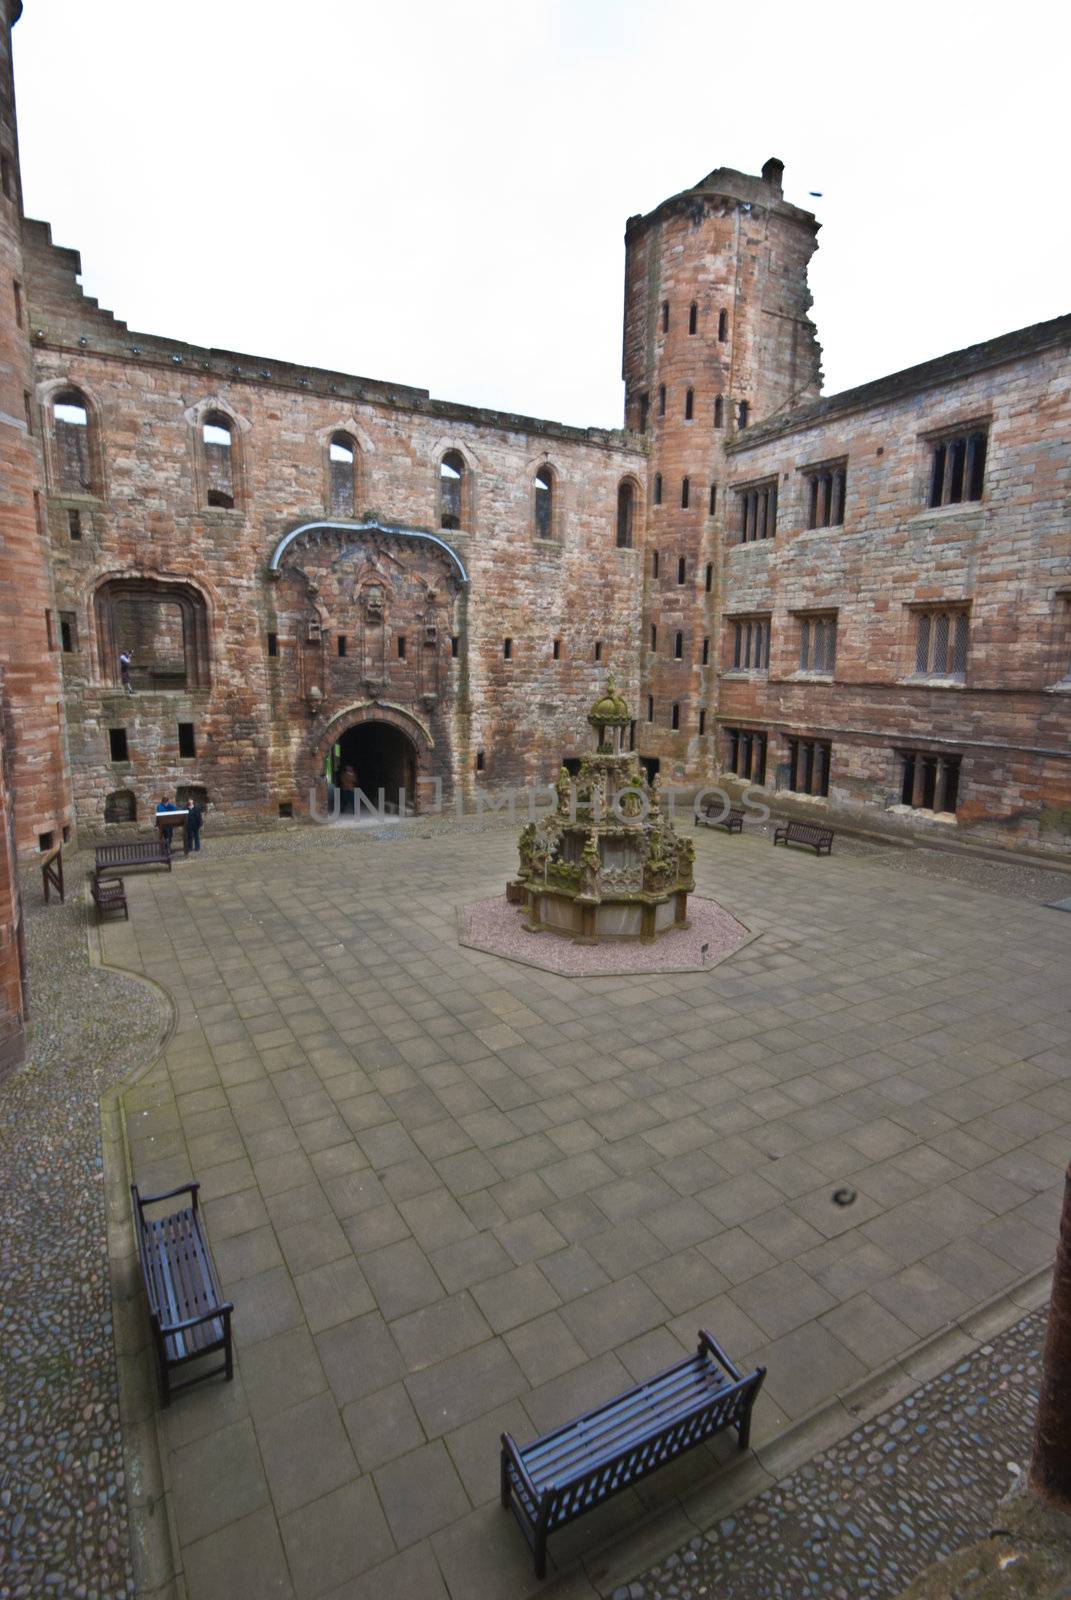 part of the famous Linlithgow Palace in Scotland